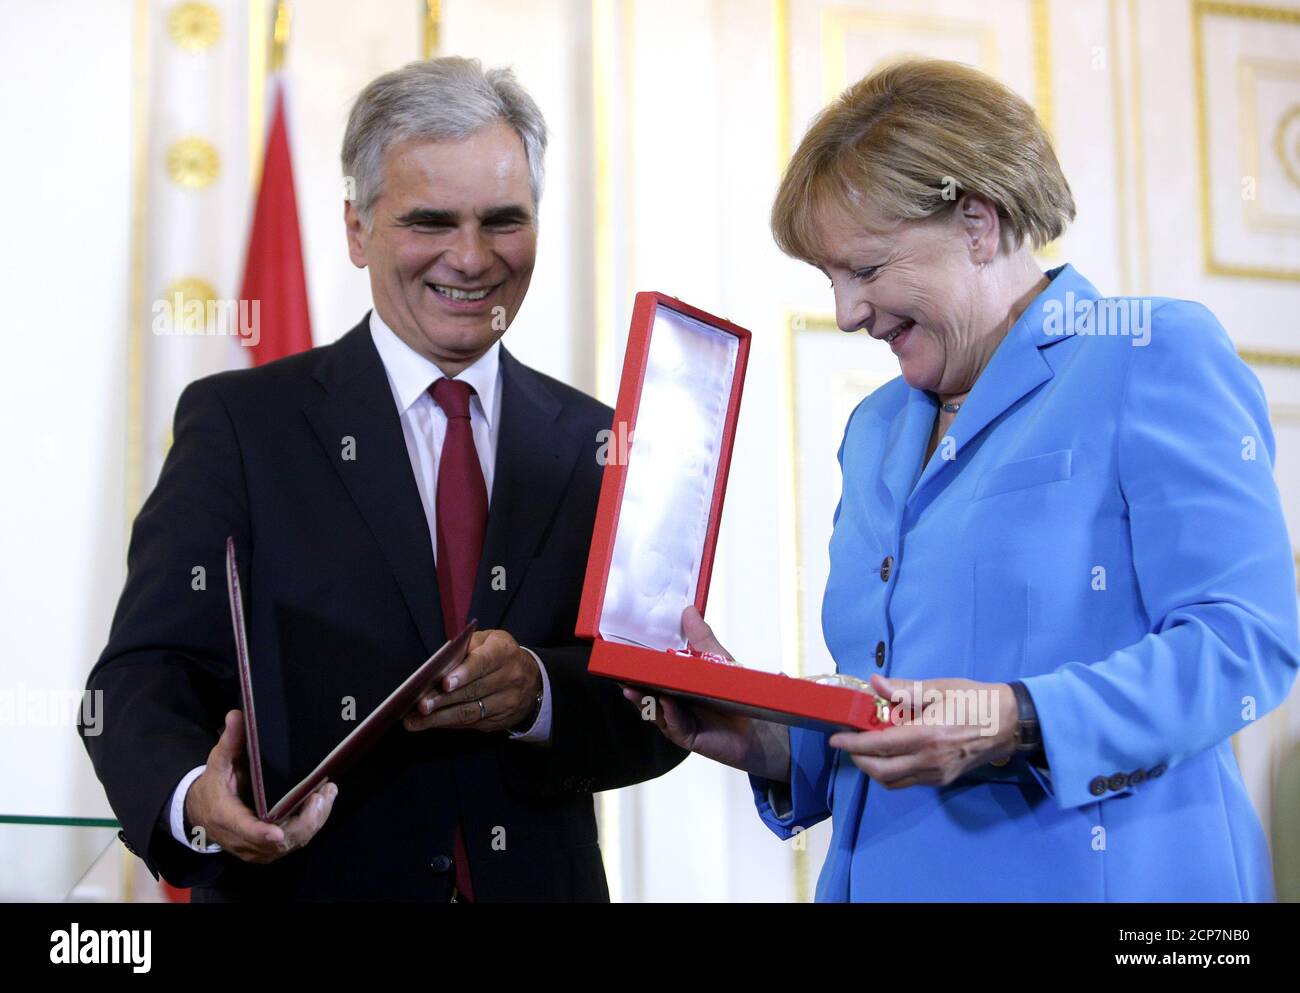 German Chancellor Angela Merkel receives the Golden Decoration of Honour for Services to the Republic of Austria from Austrian Chancellor Werner Faymann during the Western Balkans Summit in Vienna August 27, 2015.   REUTERS/Lisi Niesner Stock Photo